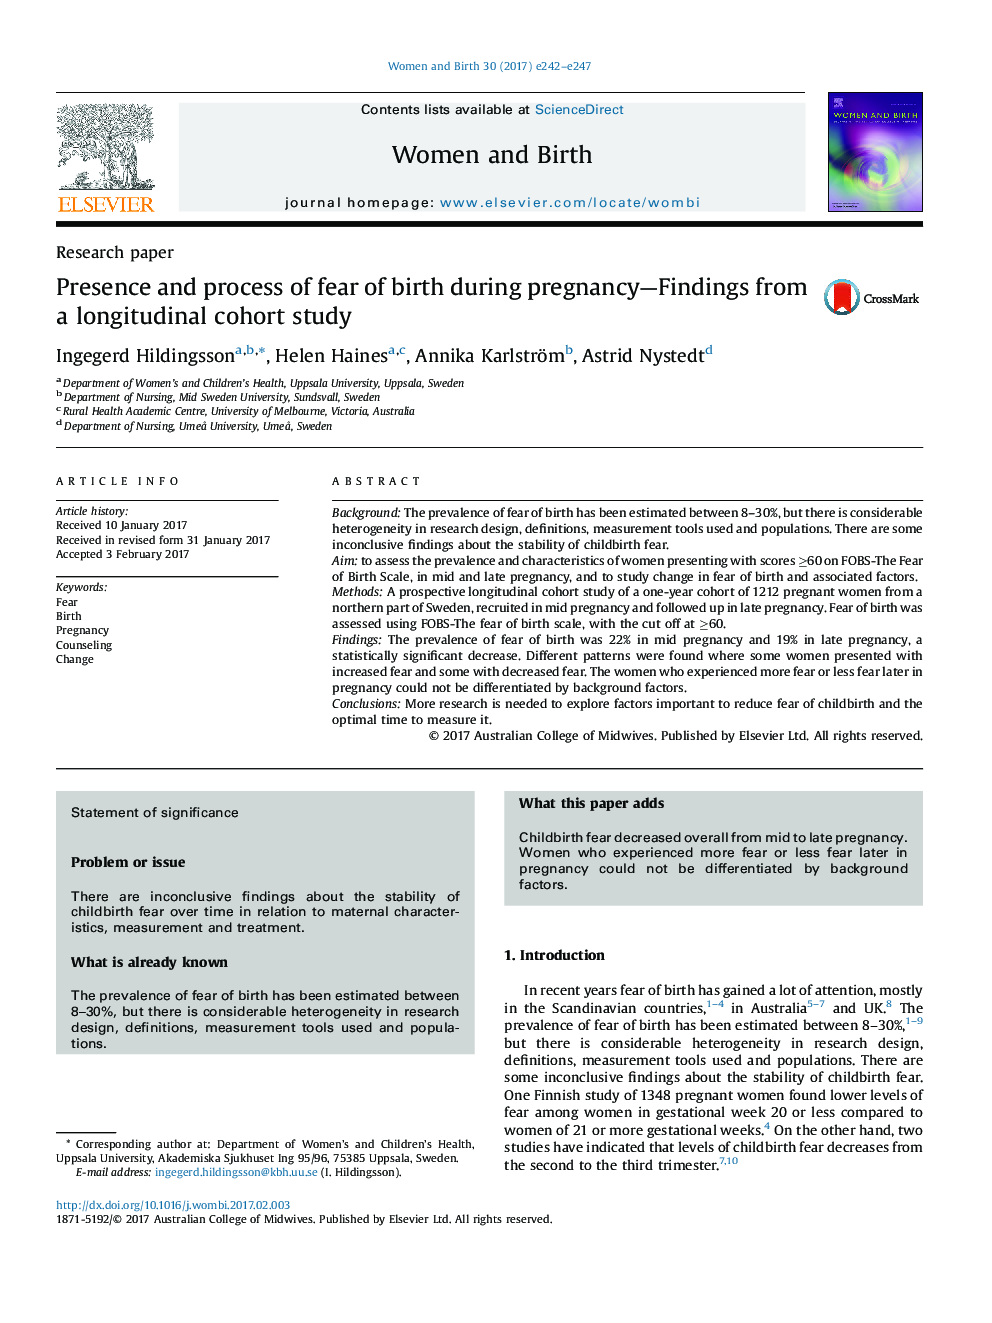 Presence and process of fear of birth during pregnancy-Findings from a longitudinal cohort study